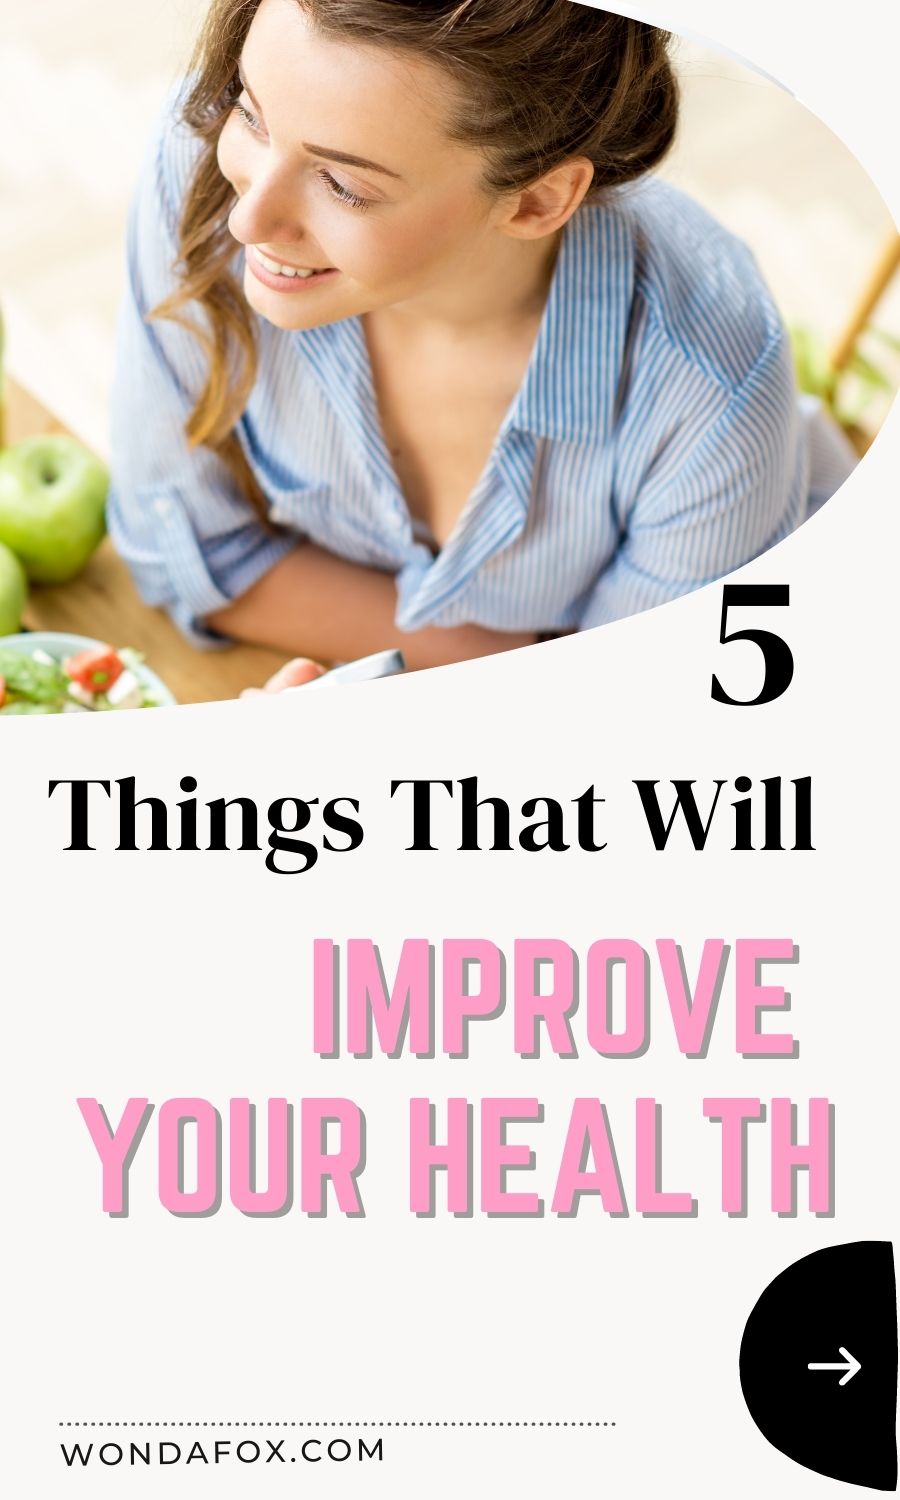 5 things that will improve your health